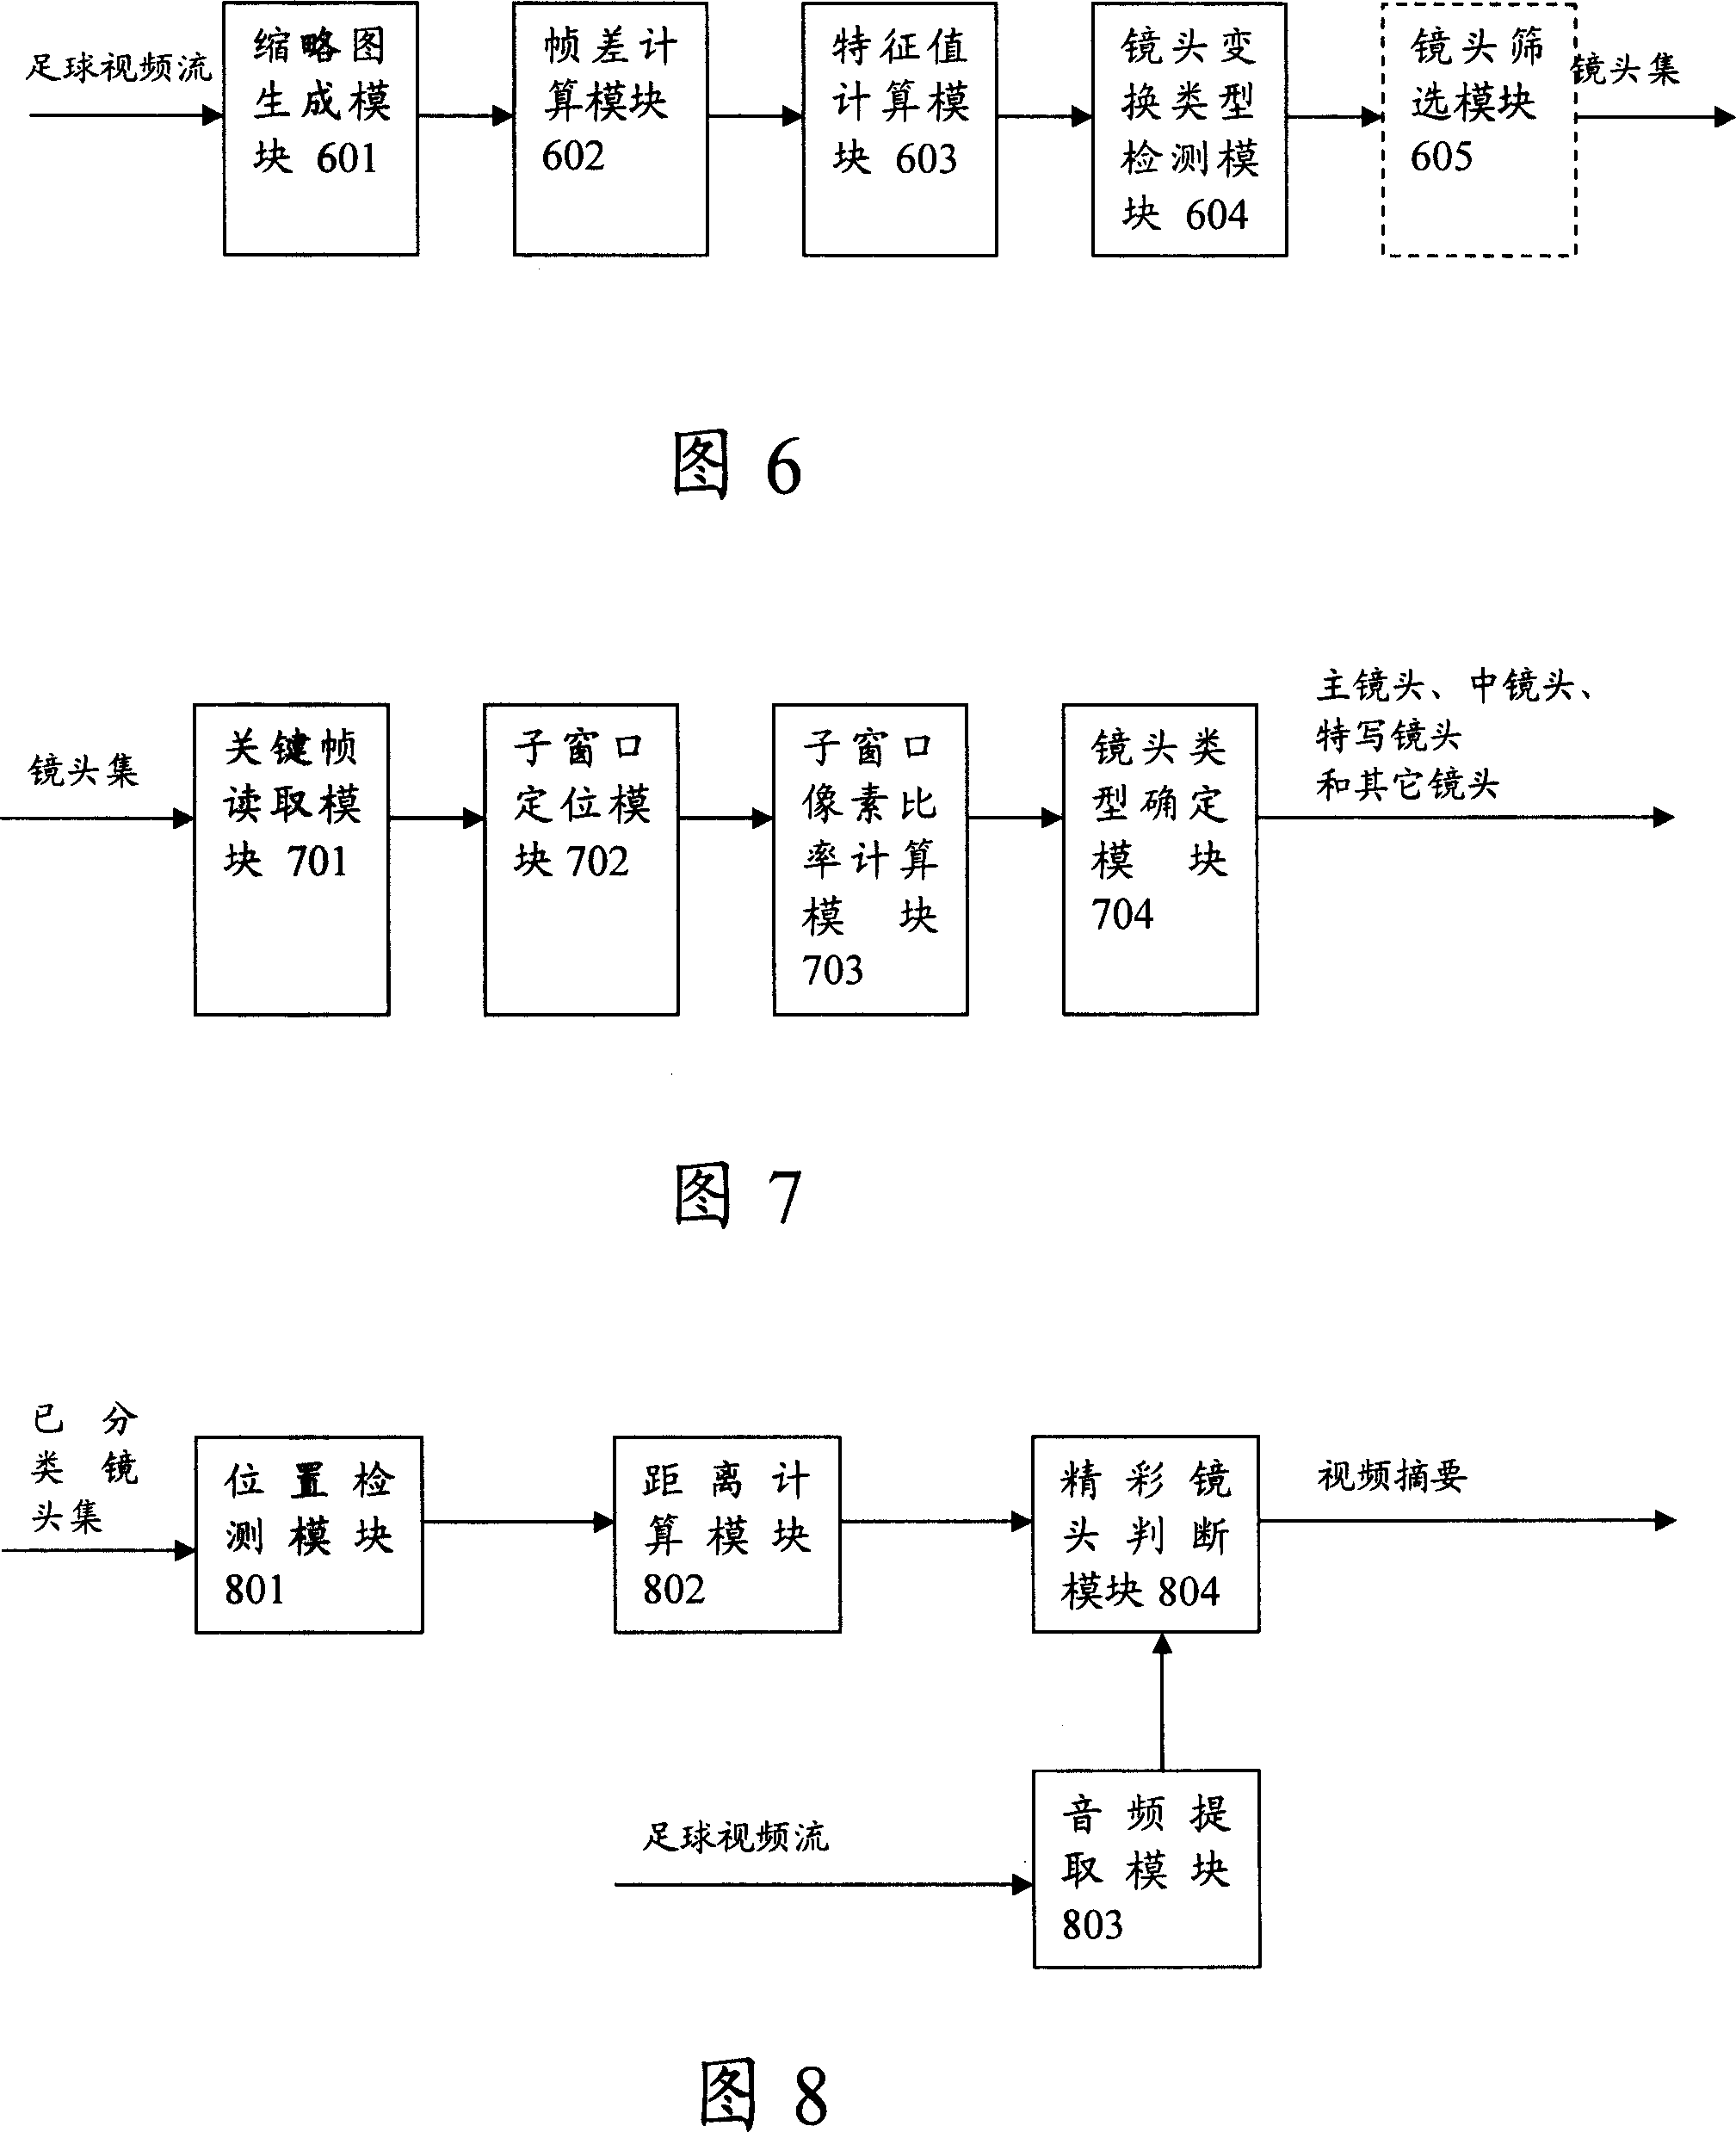 Method and apparatus for adaptively generating abstract of football video